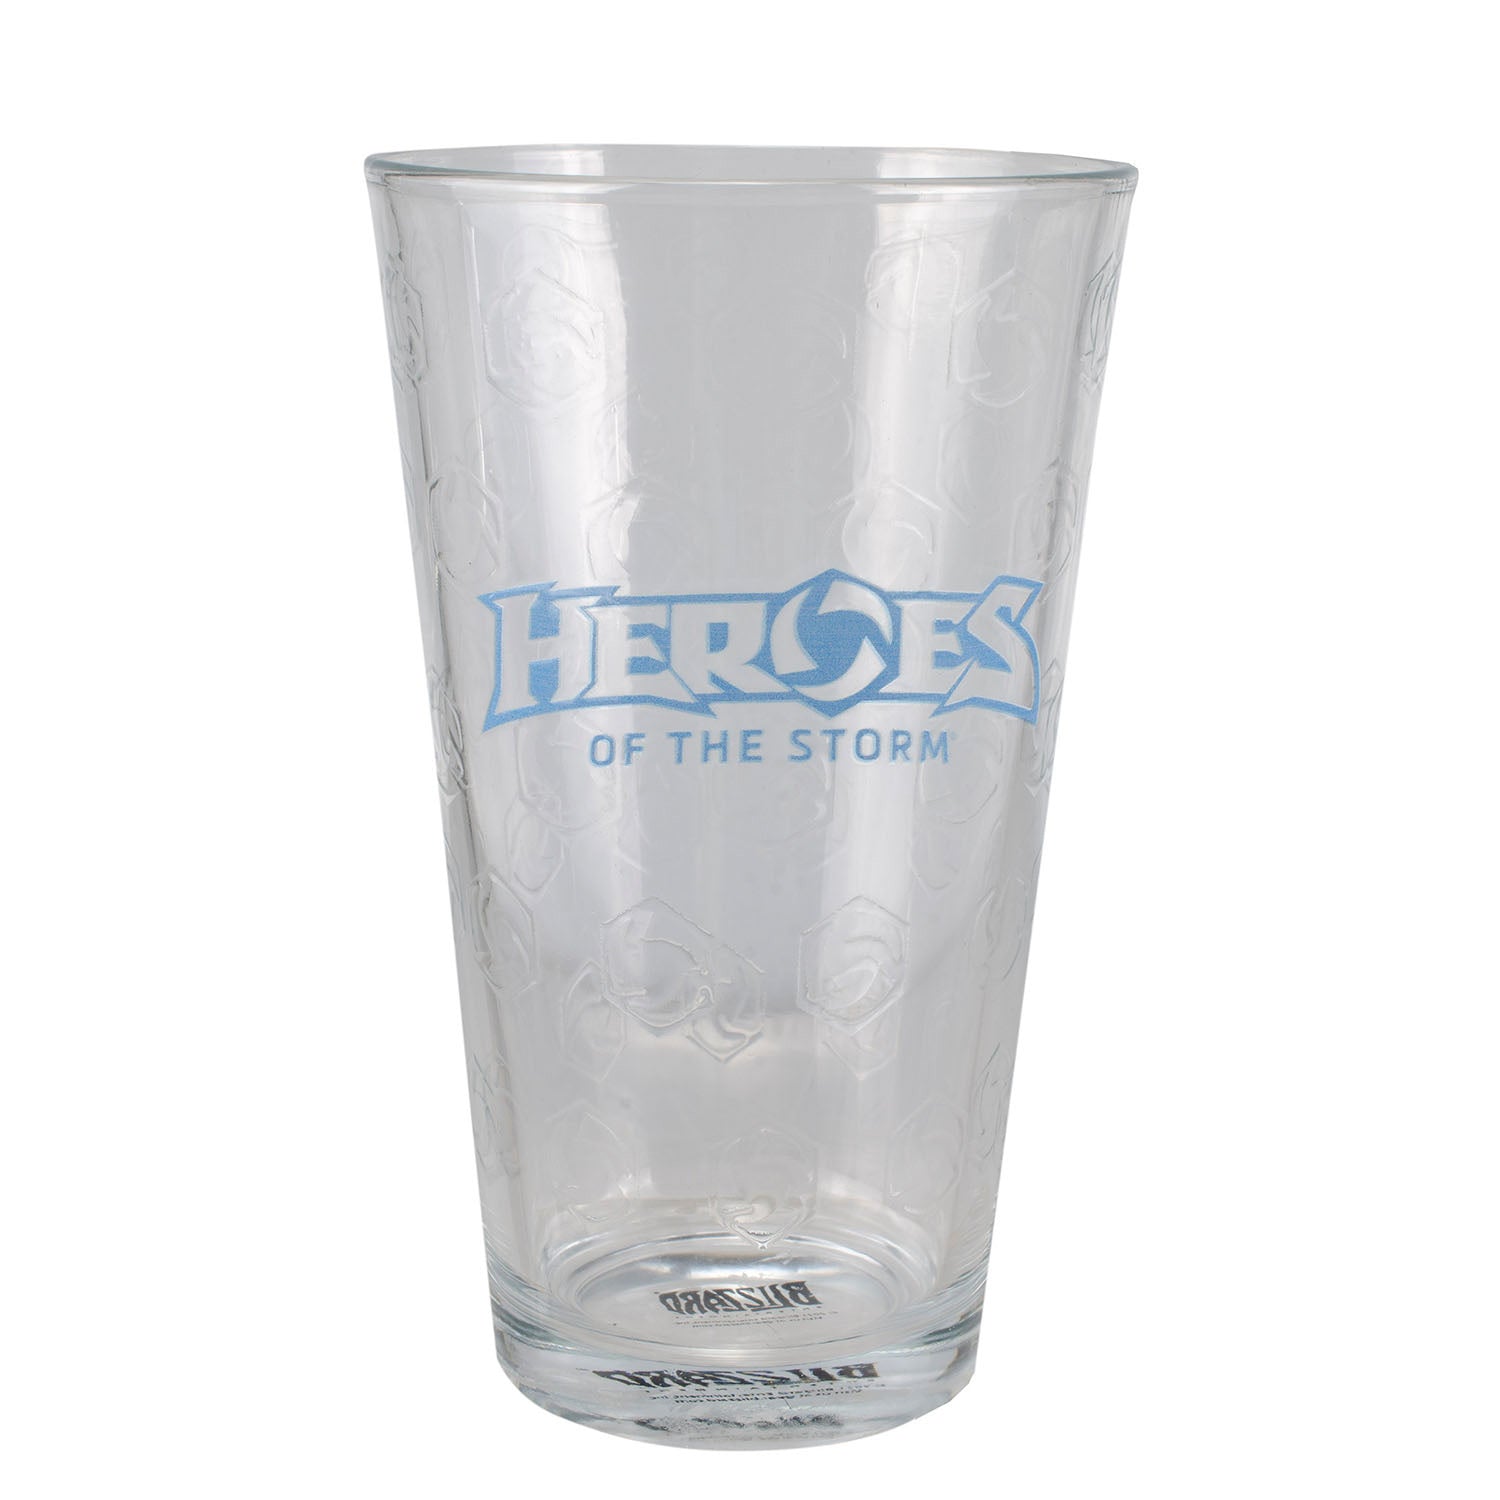 Heroes of the Storm 16oz Pint Glass in Blue - Front View